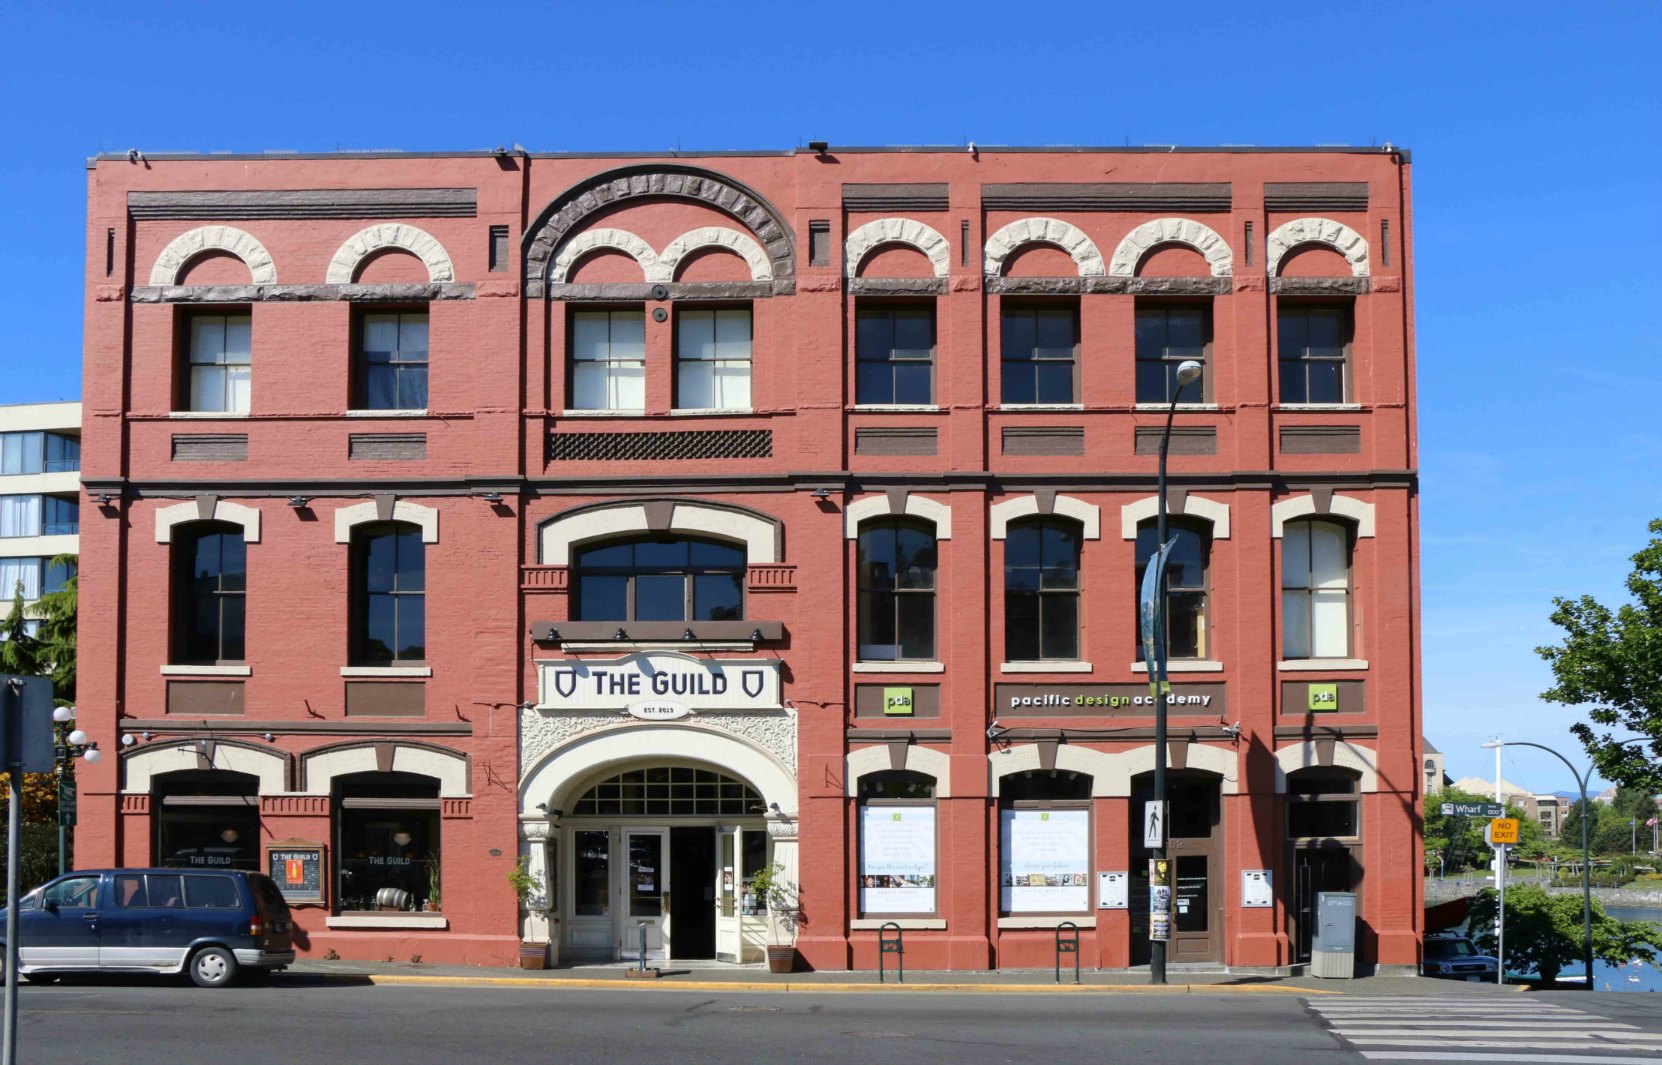 1244-1252 Wharf Street, originally built in 1882 architect John Teague with subsequent additions in 1892 and 1896.